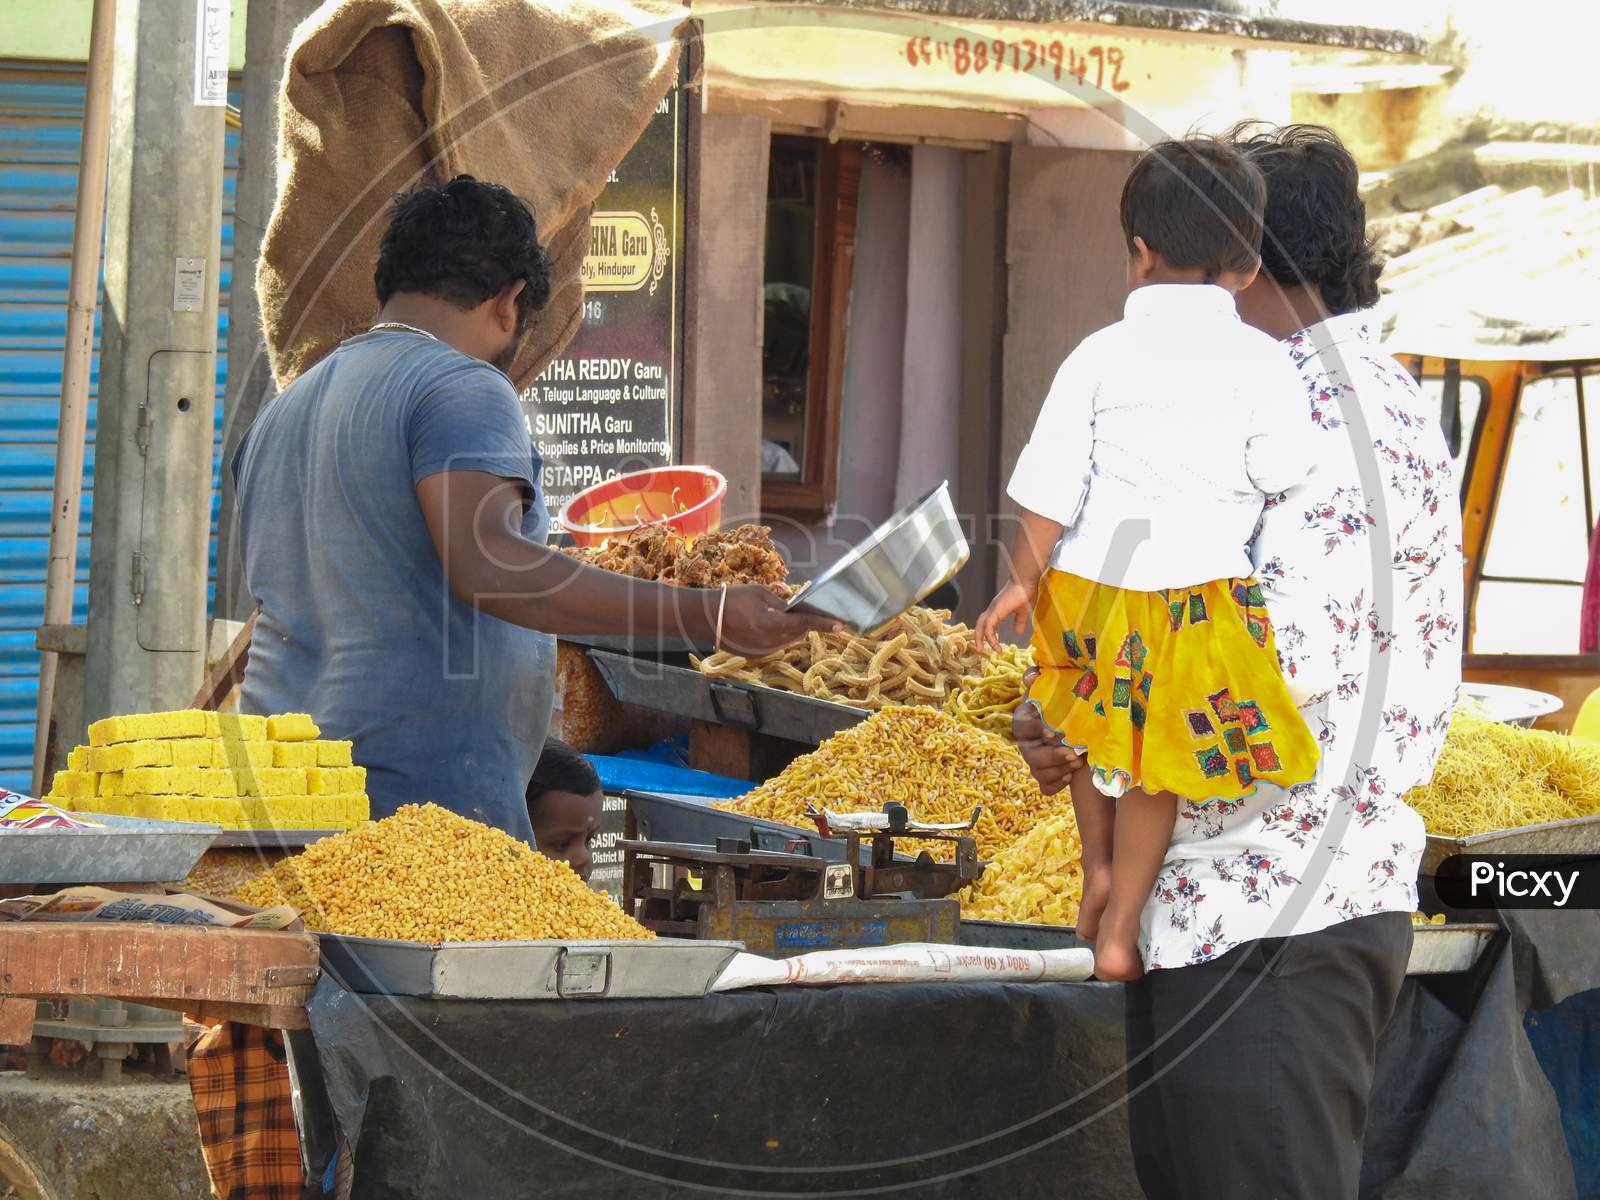 Closeup Of Roadside Sweets And Fried Food Selling In A Cart By Weighing In Traditional Weight Scale.